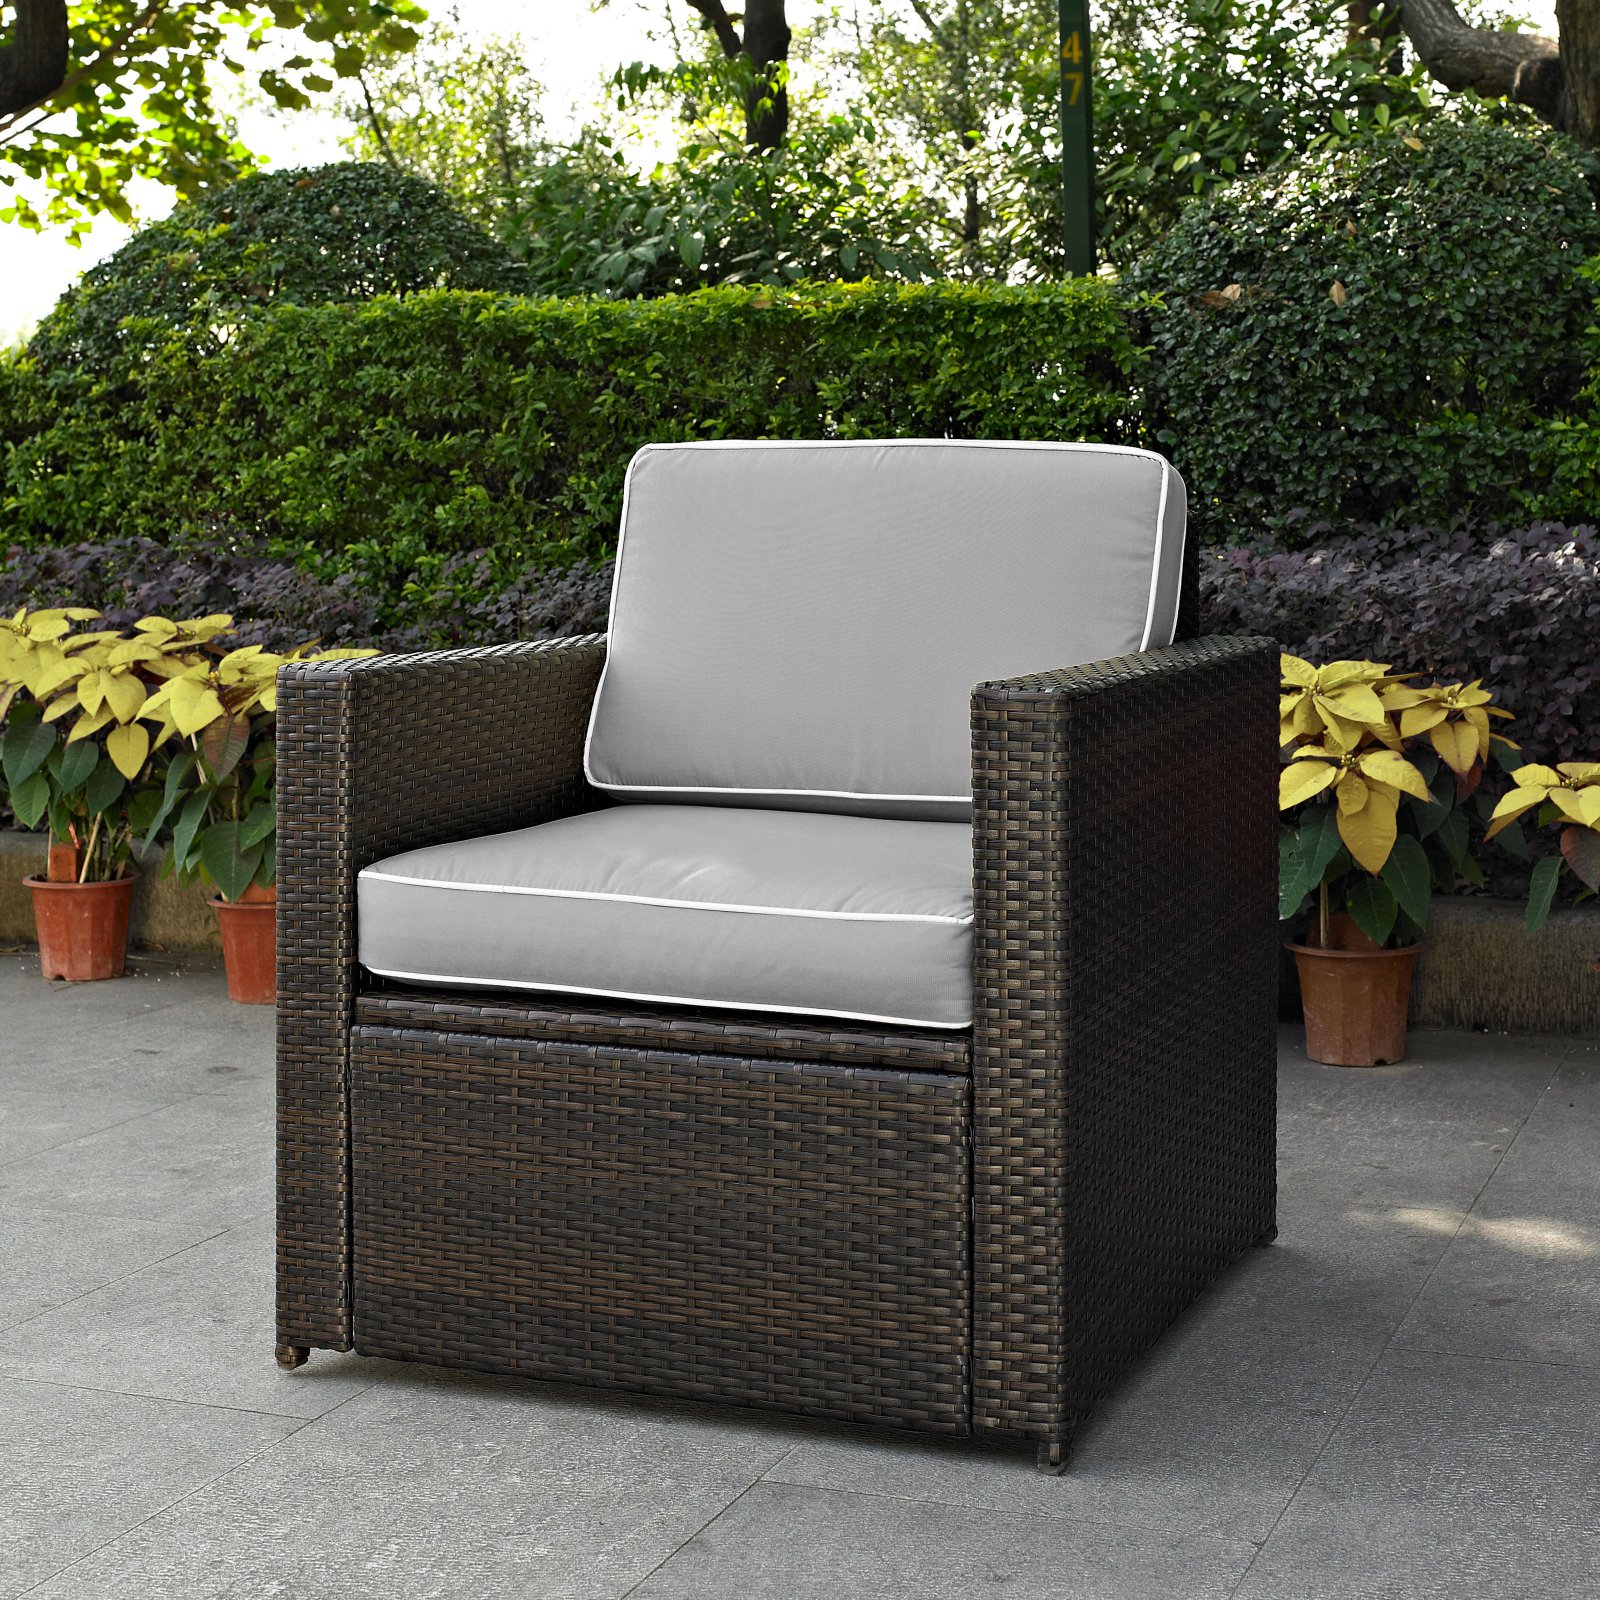 Crosley Furniture KO70088BR-GY Palm Harbor Resin Wicker Outdoor Arm Chair (Brown/Grey) - image 2 of 2